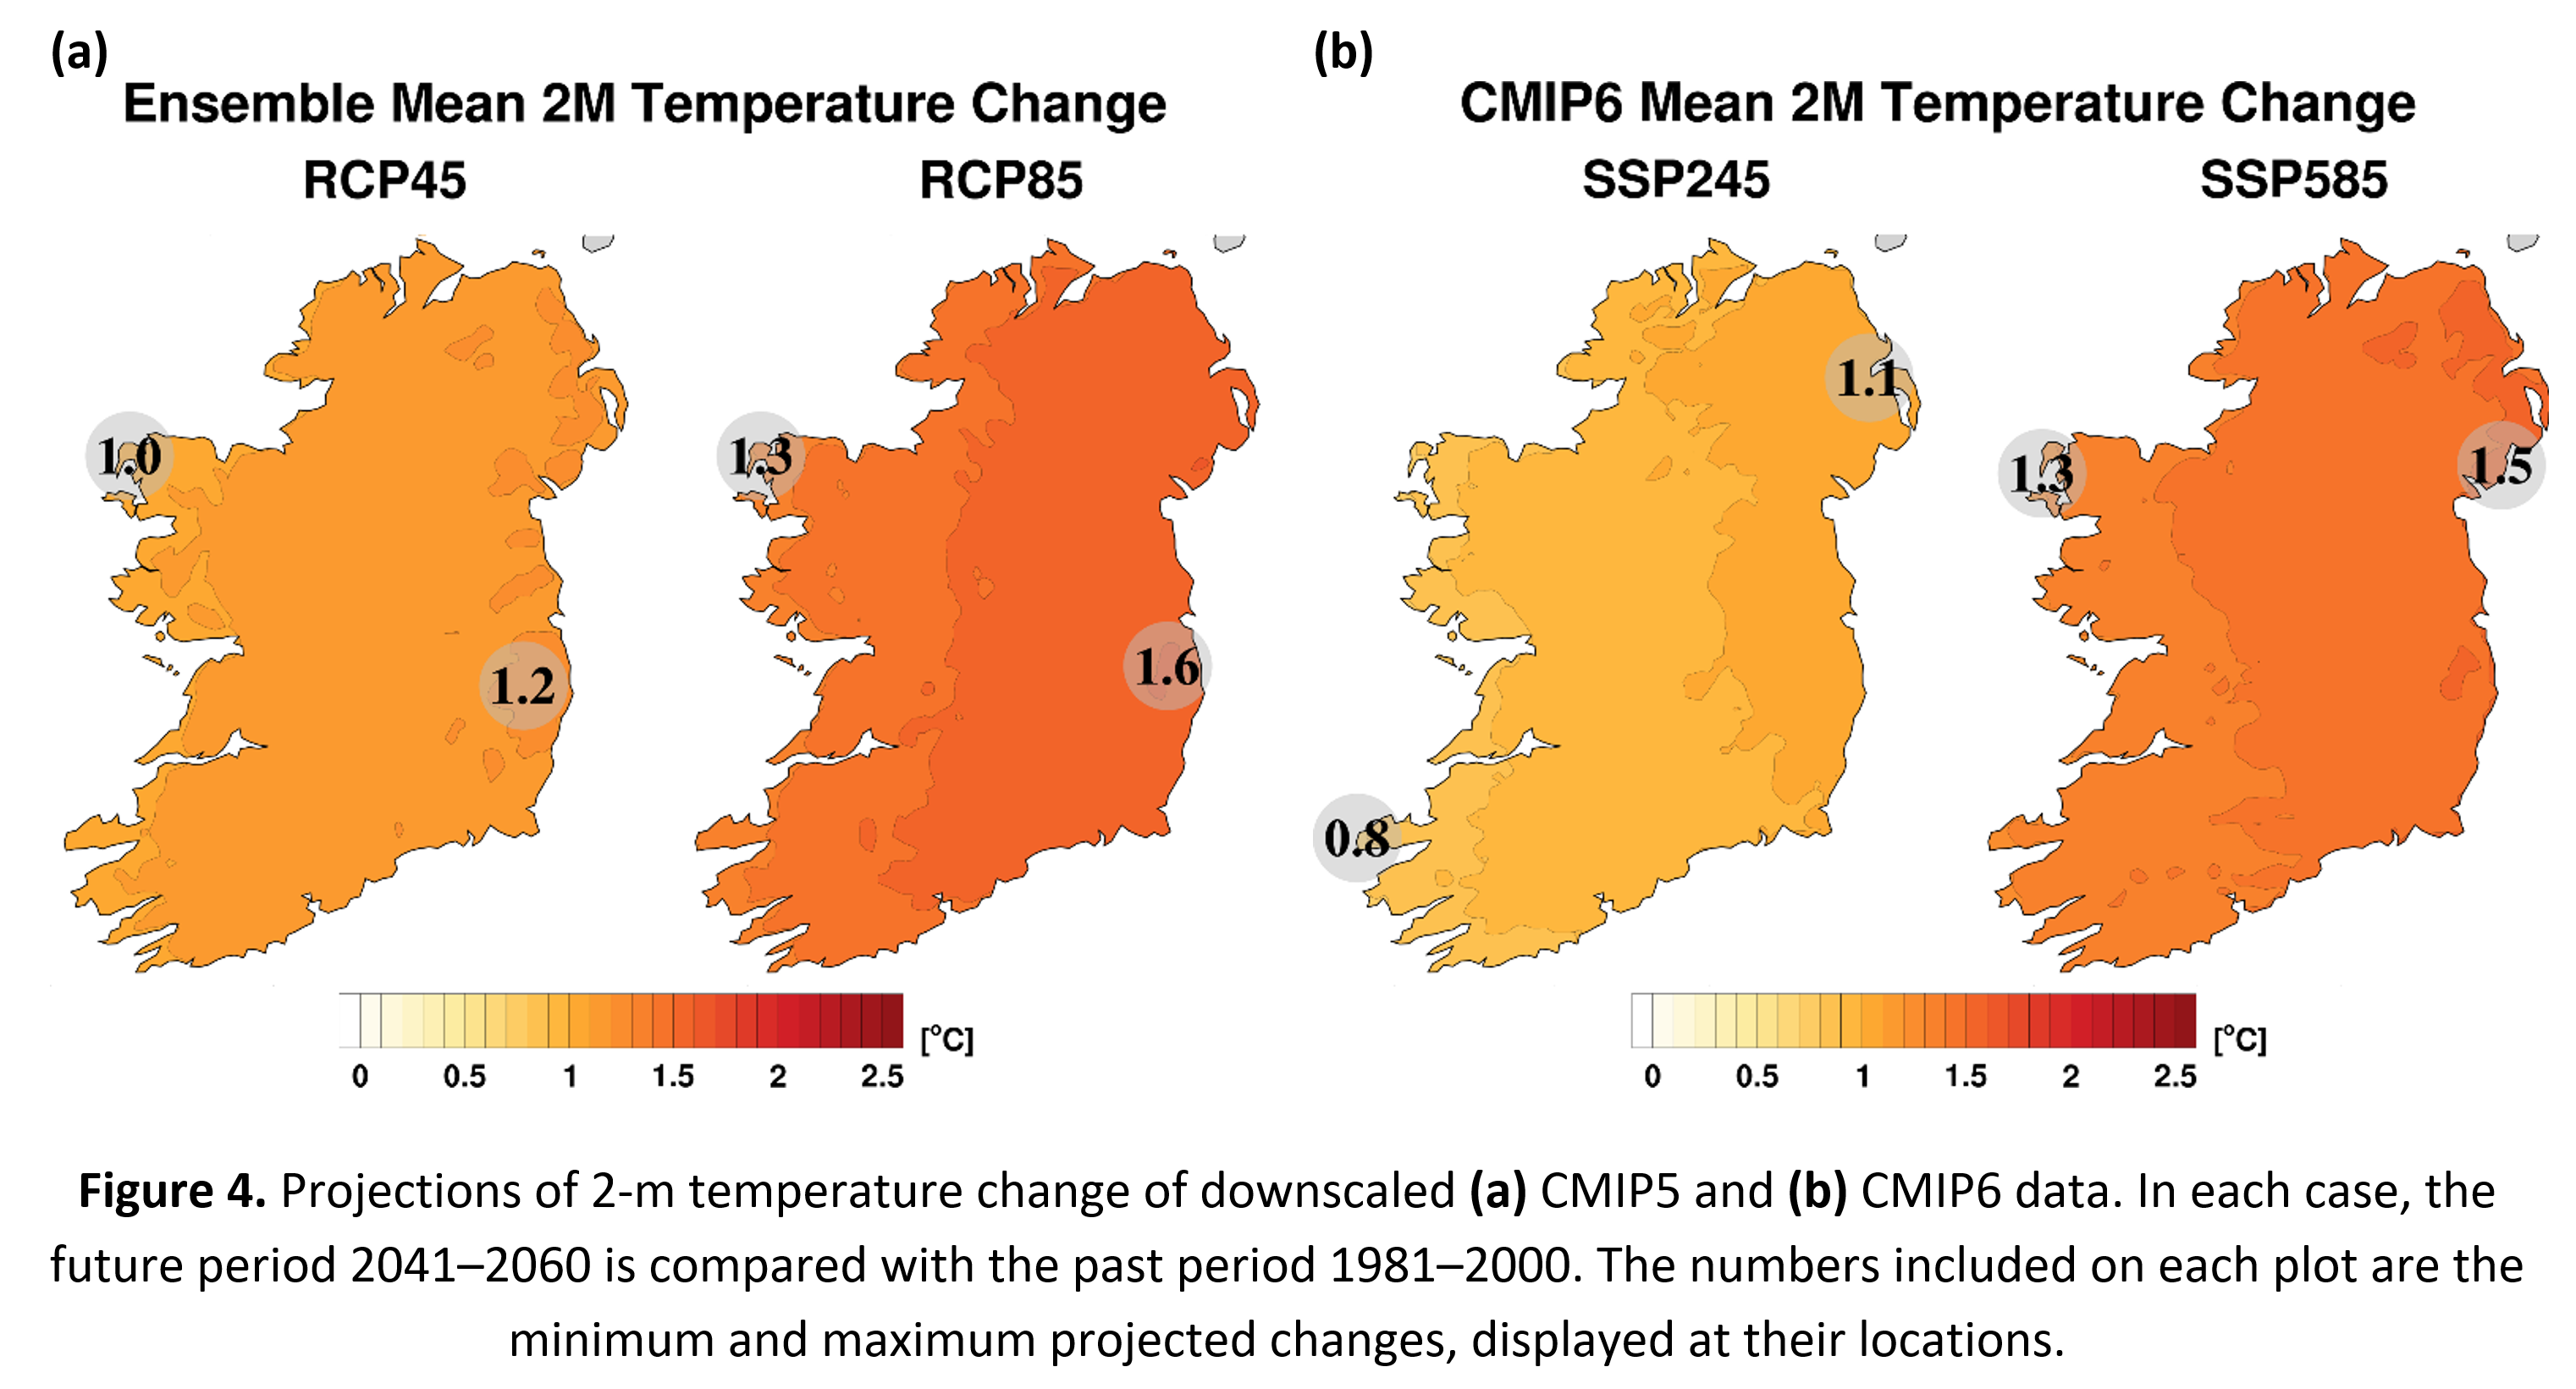  Figure 4. Projections of 2-m temperature change of downscaled (a) CMIP5 and (b) CMIP6 data. In each case, the future period 2041–2060 is compared with the past period 1981–2000. The numbers included on each plot are the minimum and maximum projected changes, displayed at their locations.